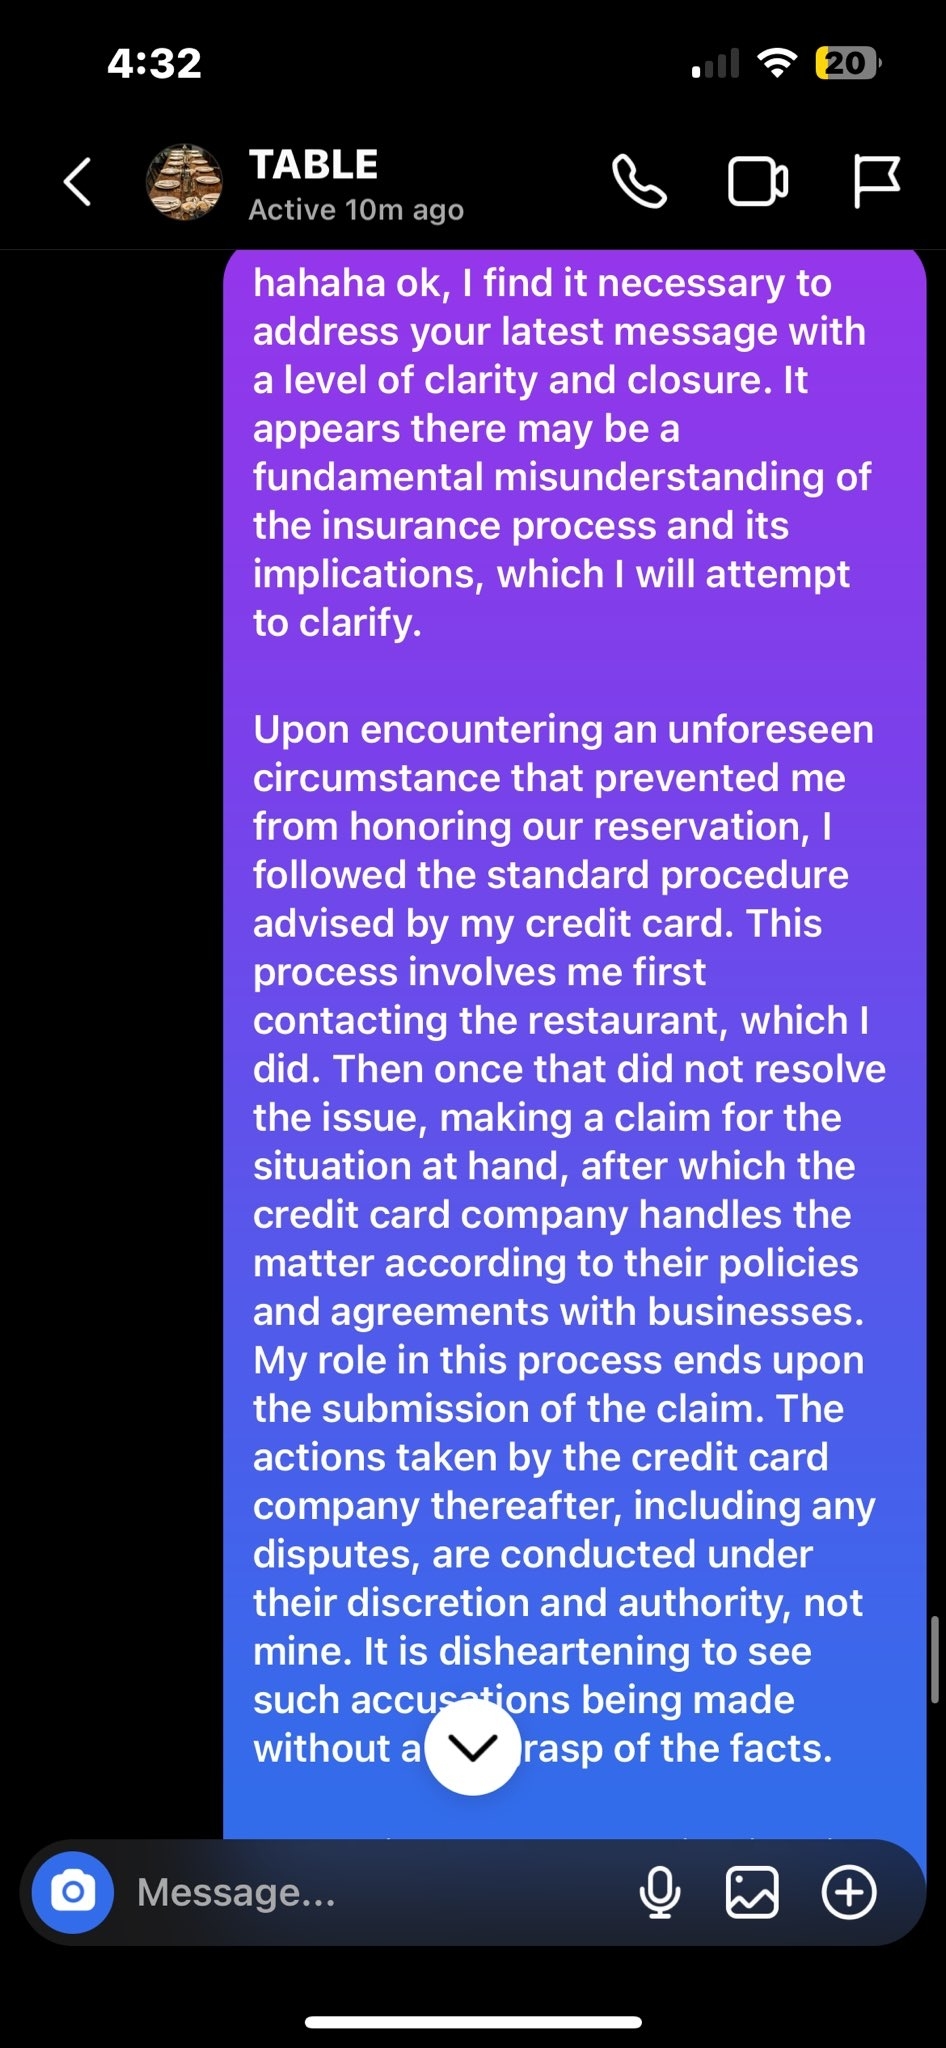 trevor responding to jen that he submitted the claim and what the credit card company did thereafter was out of his hands